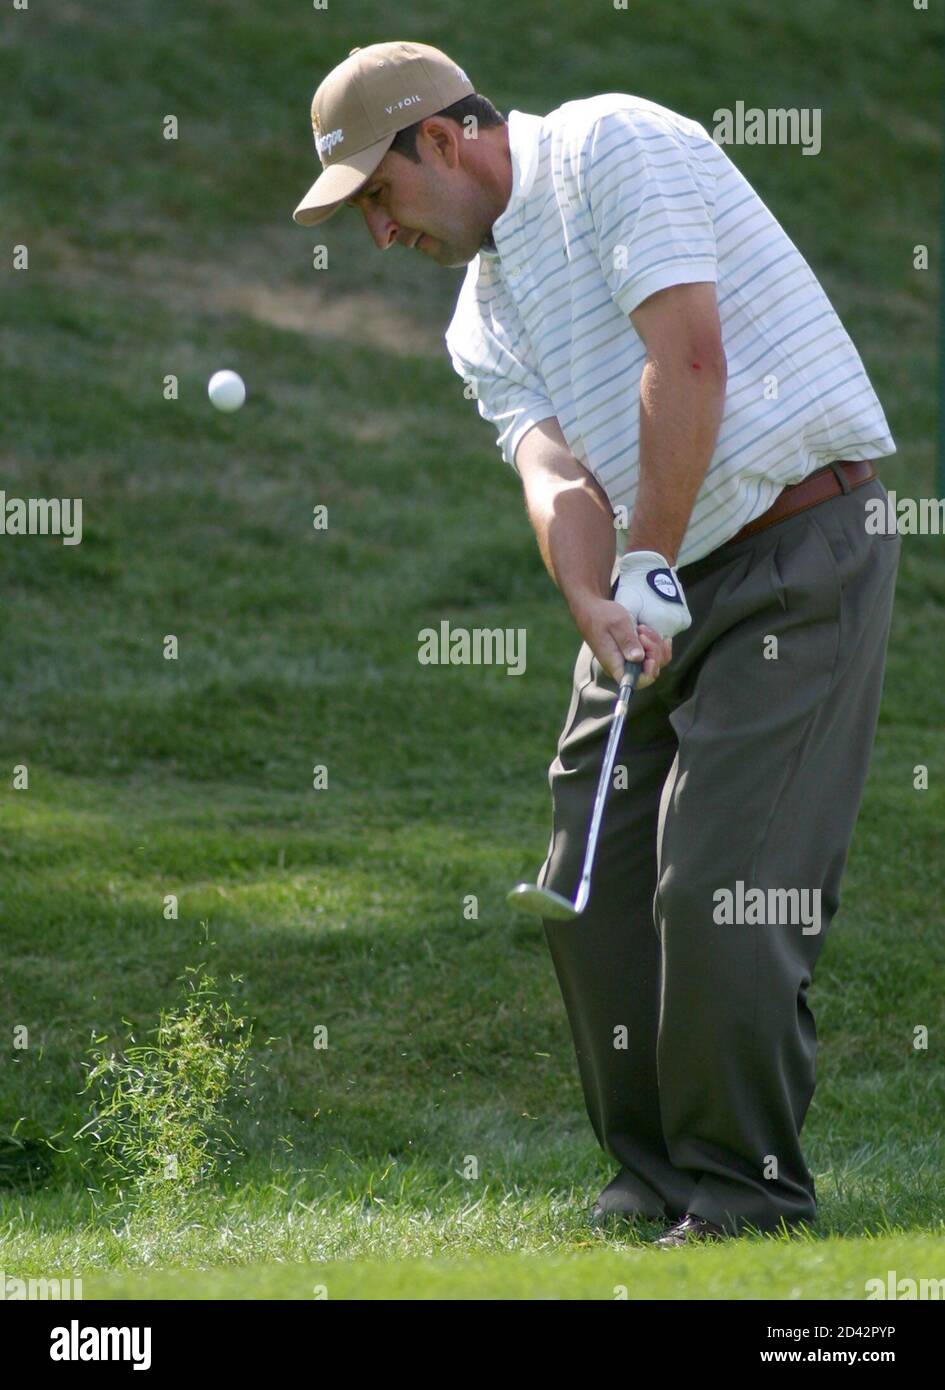 Jose Maria Olazabal of Spain chips from the rough near the ninth green during the second round of The International, in Castle Rock, Colorado, August 2, 2002. Olazabal is among the early leaders in the second round of the modified Stableford scoring tournament. REUTERS/Gary C. Caskey  GCC/HB Stock Photo